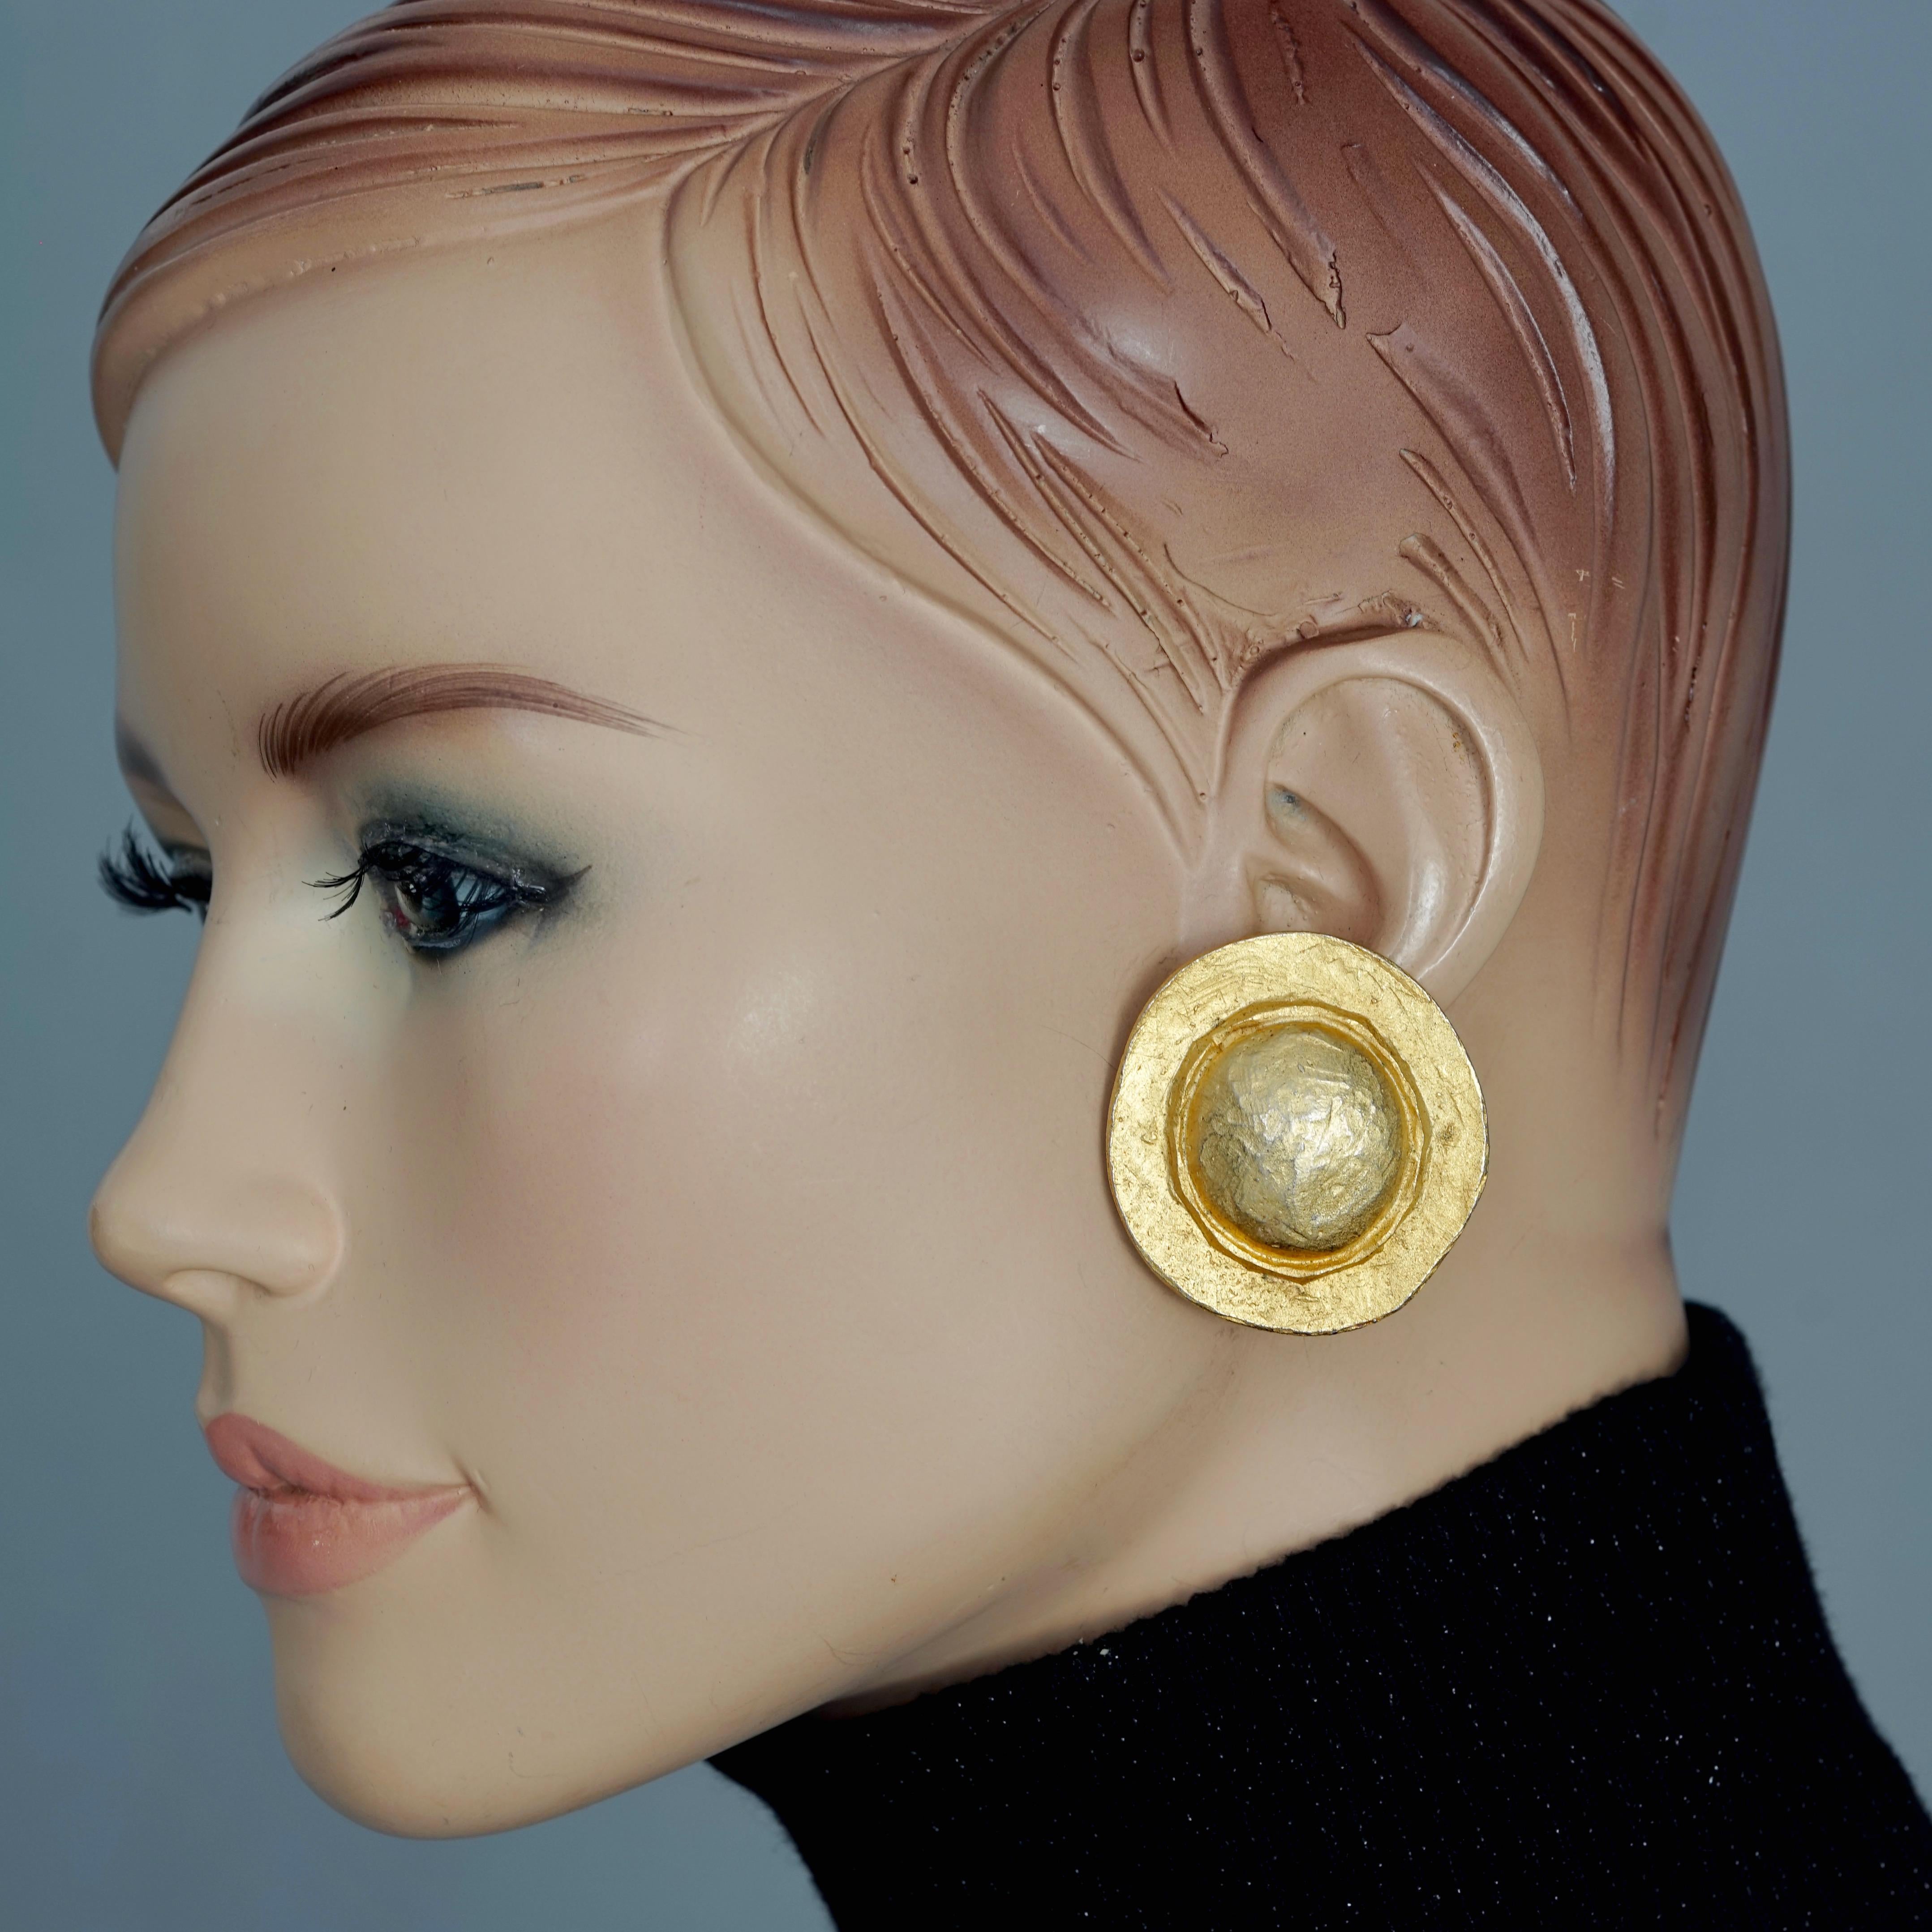 Vintage EDOUARD RAMBAUD Textured Disc Earrings

Measurements:
Height: 1.57 inches (4 cm)
Width: 1.57 inches (4 cm)
Weight per Earring: 17 grams

Features:
- 100% Authentic EDOUARD RAMBAUD.
- Textured disc earrings.
- Gold tone hardware.
- Clip back